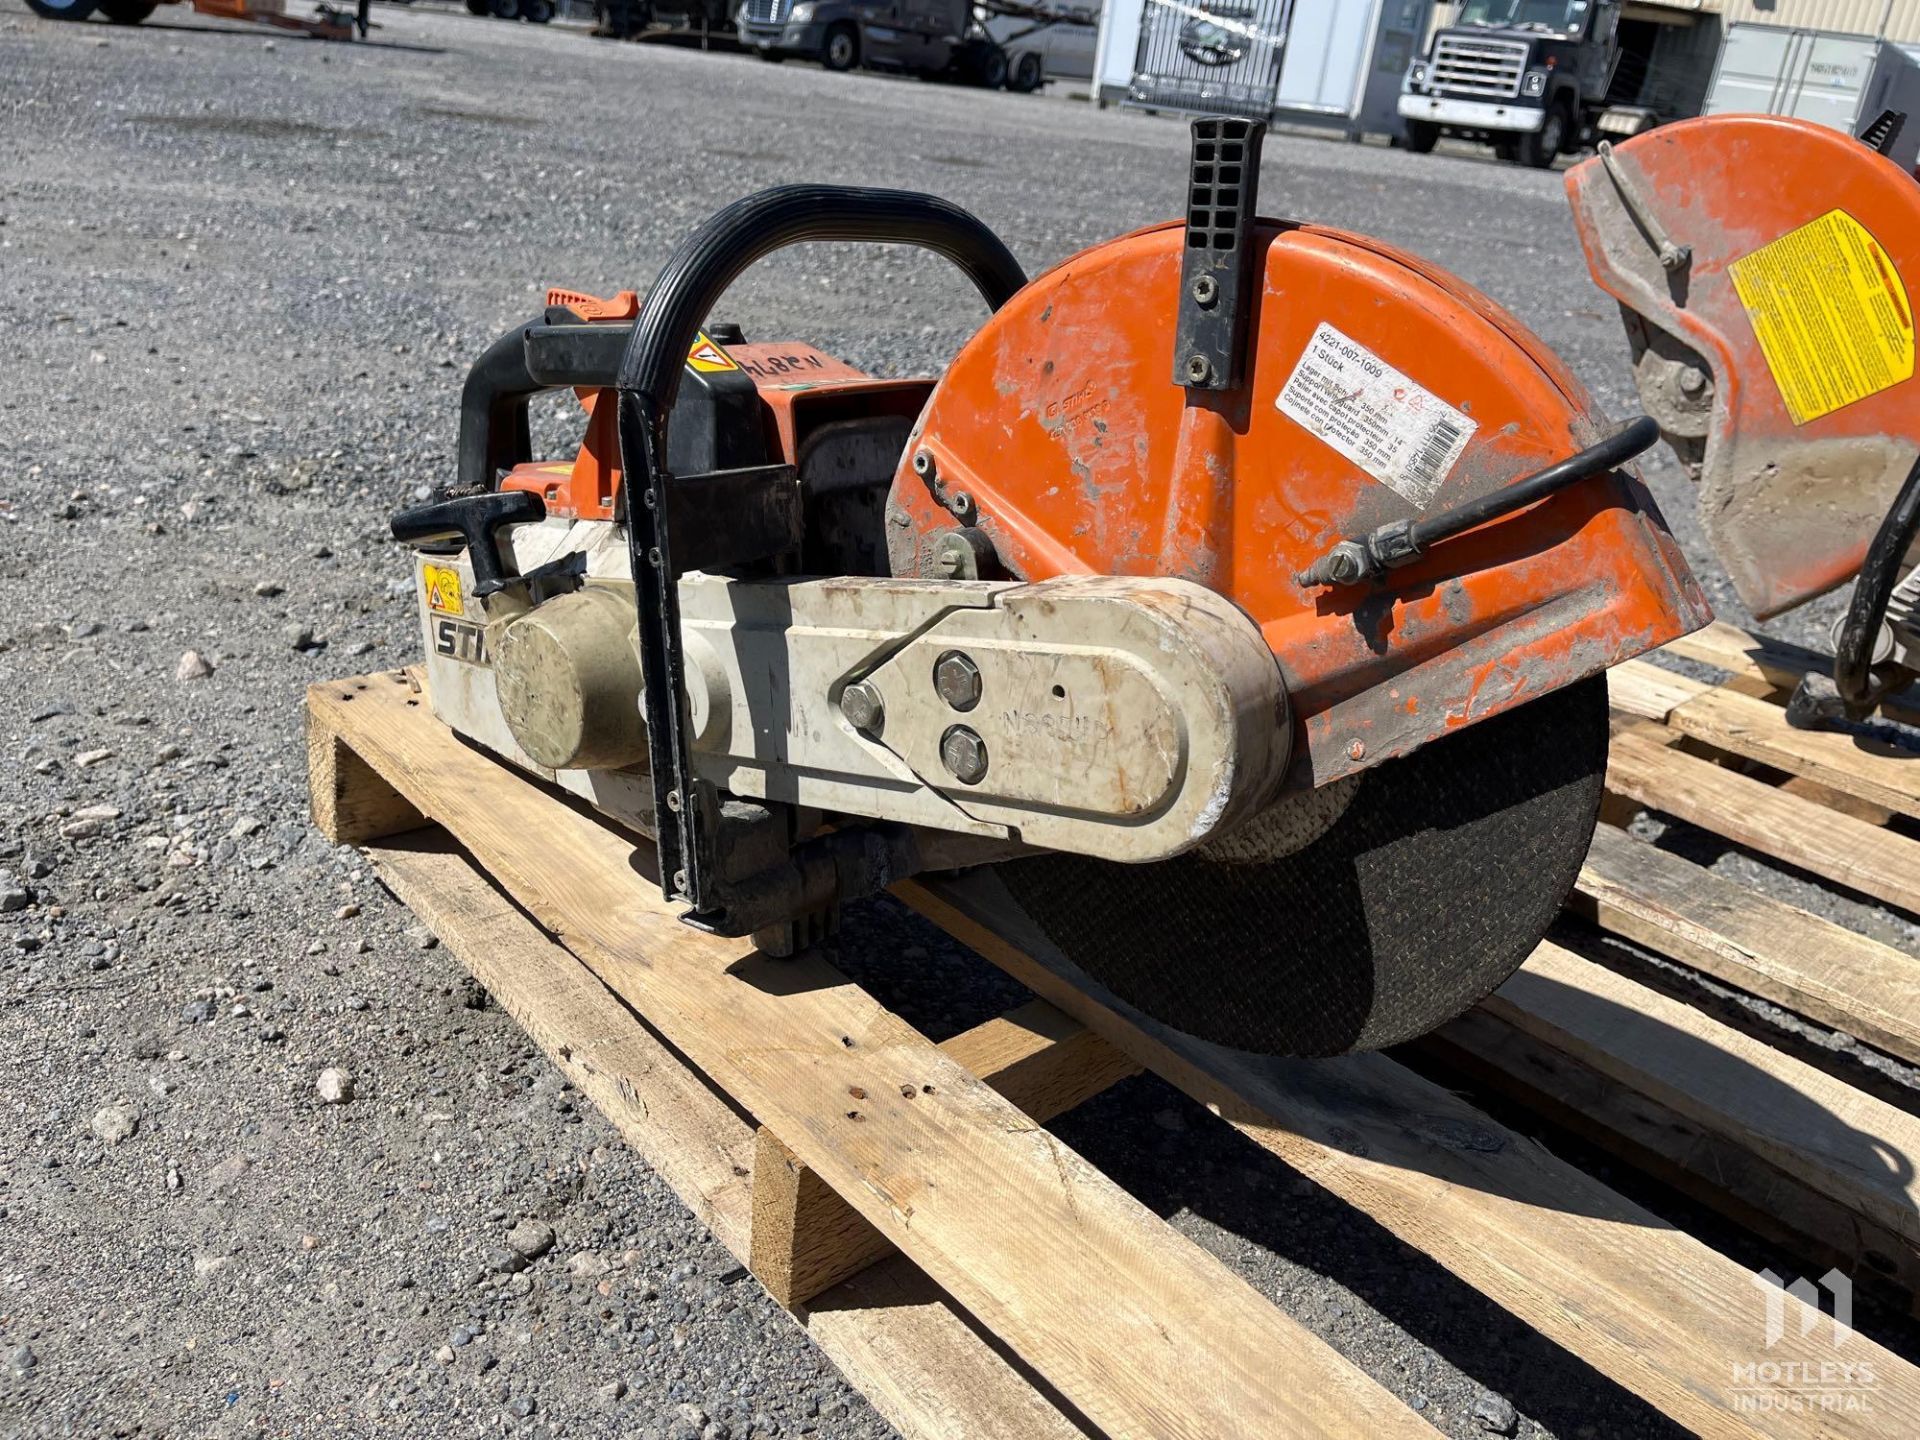 2008 Sthil TS460 Concrete Saw - Image 4 of 6